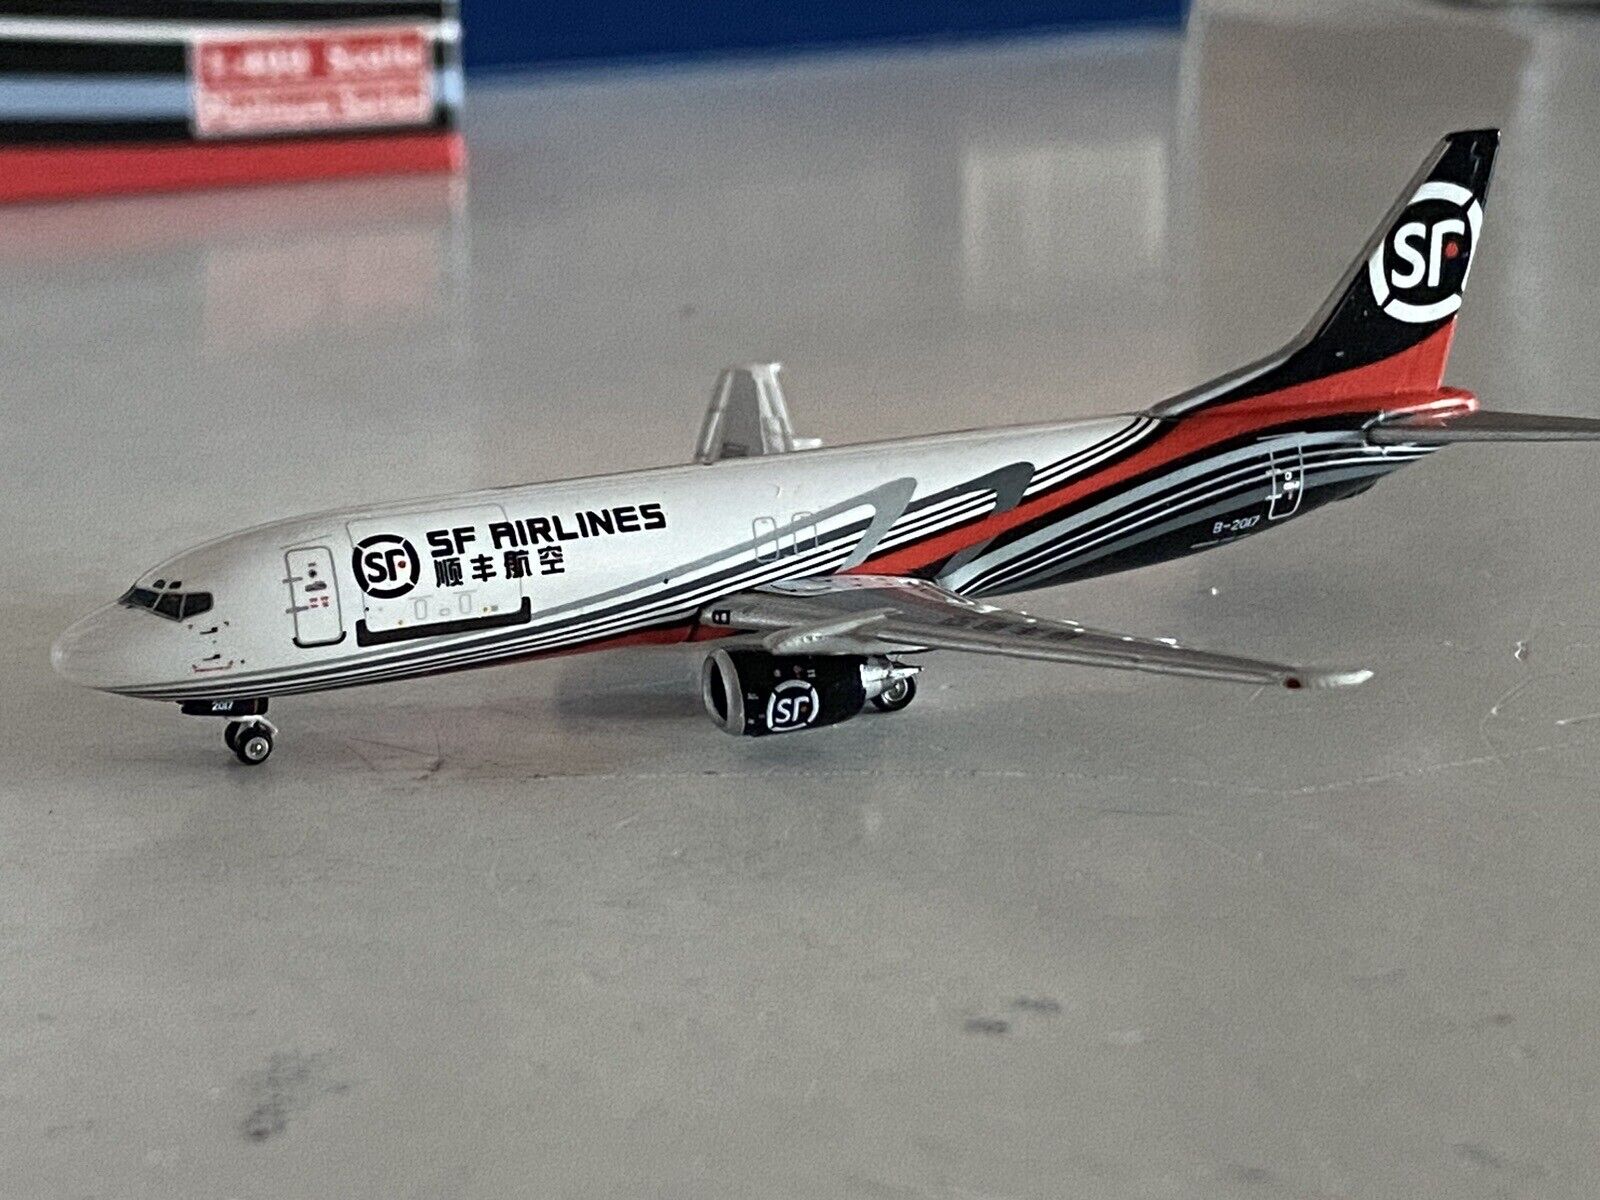 Phoenix Models SF Airlines Boeing 737-400F 1:400 B-2017 PHCSS937 China